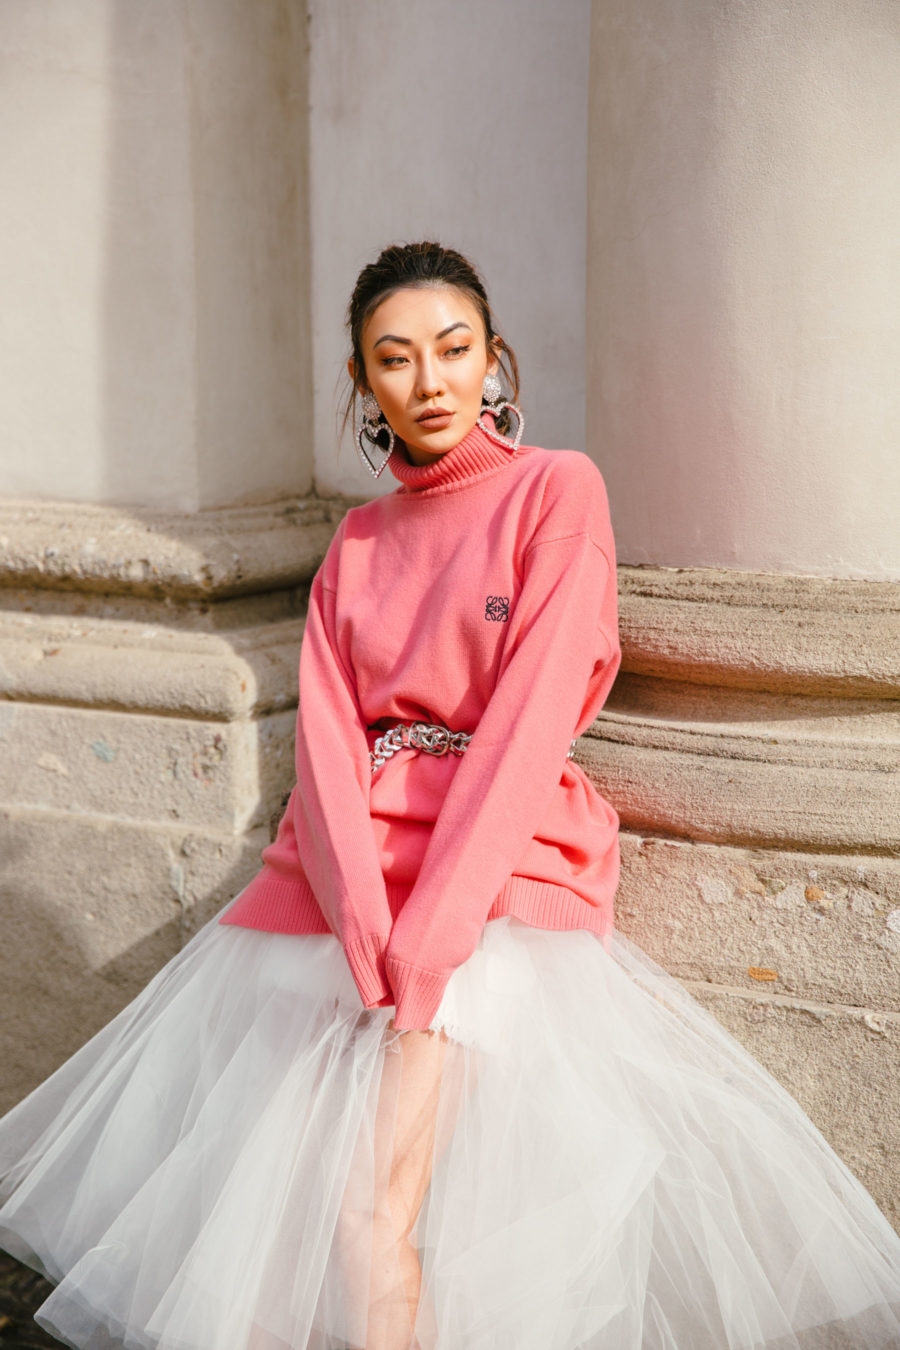 spring trends that are worth the investment featuring coral pink sweater and unravel denim tulle skirt // Notjessfashion.com